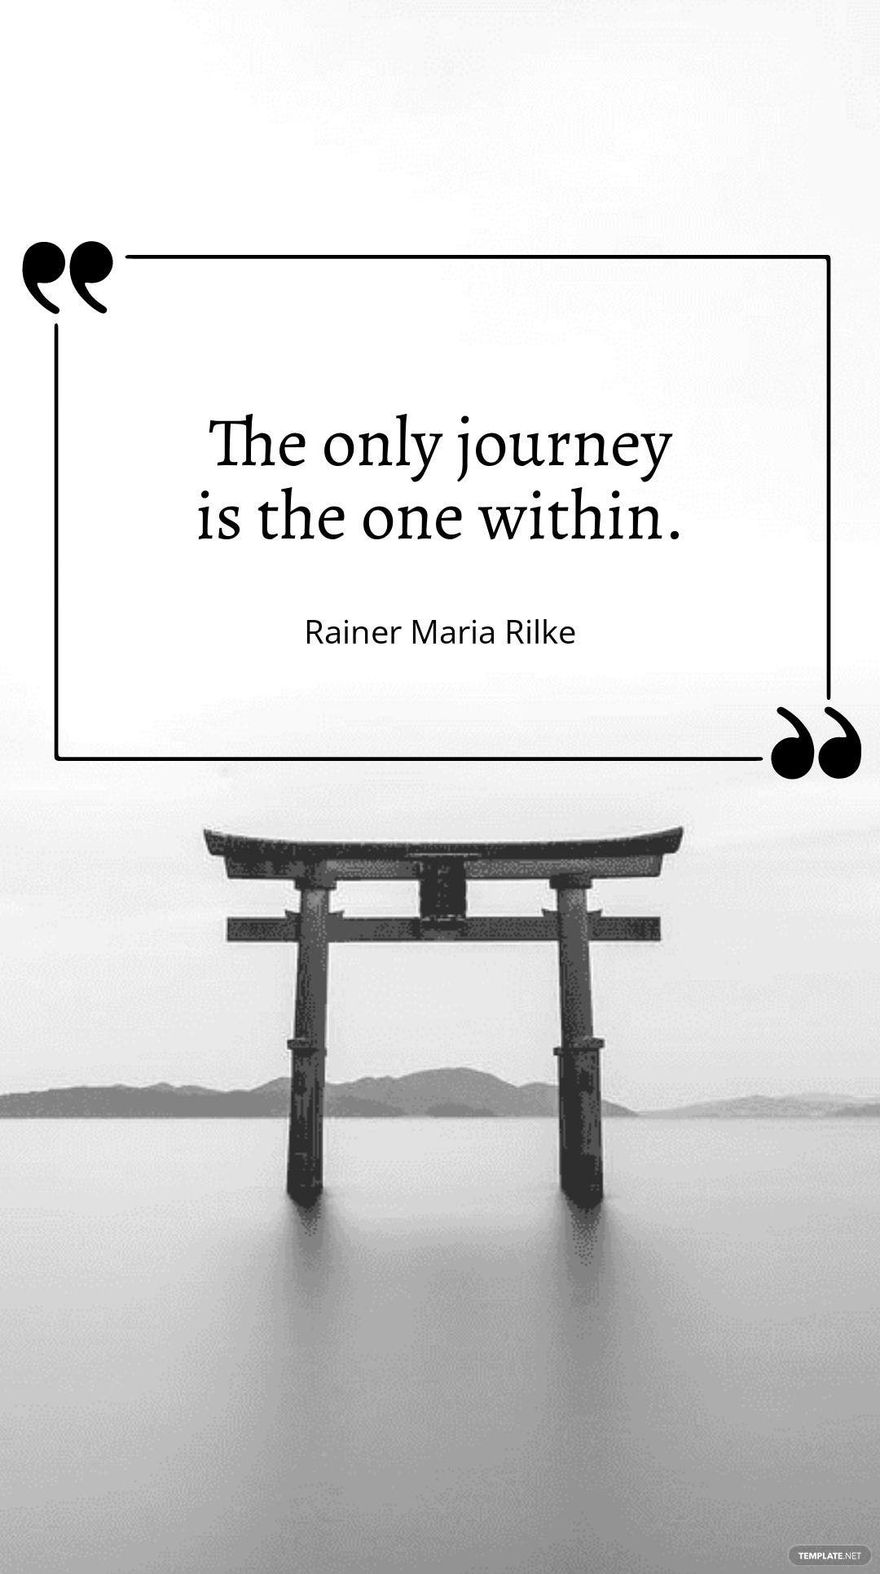 Rainer Maria Rilke - The only journey is the one within.